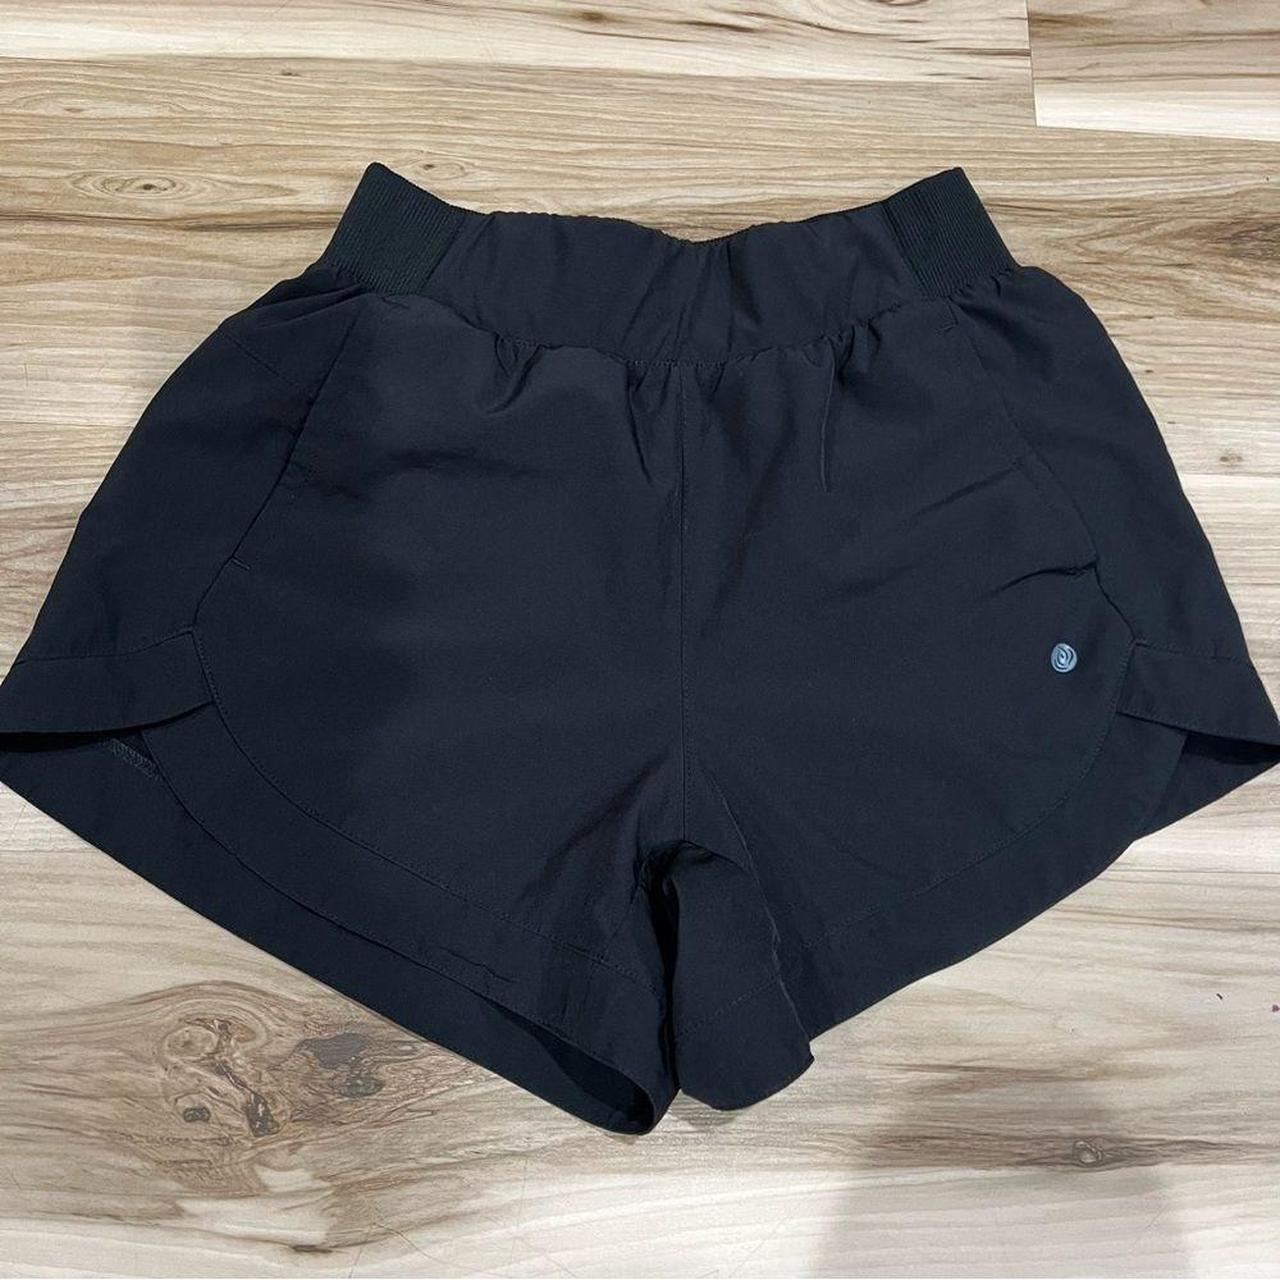 Apana Black Athletic Shorts Women's Small Offers - Depop